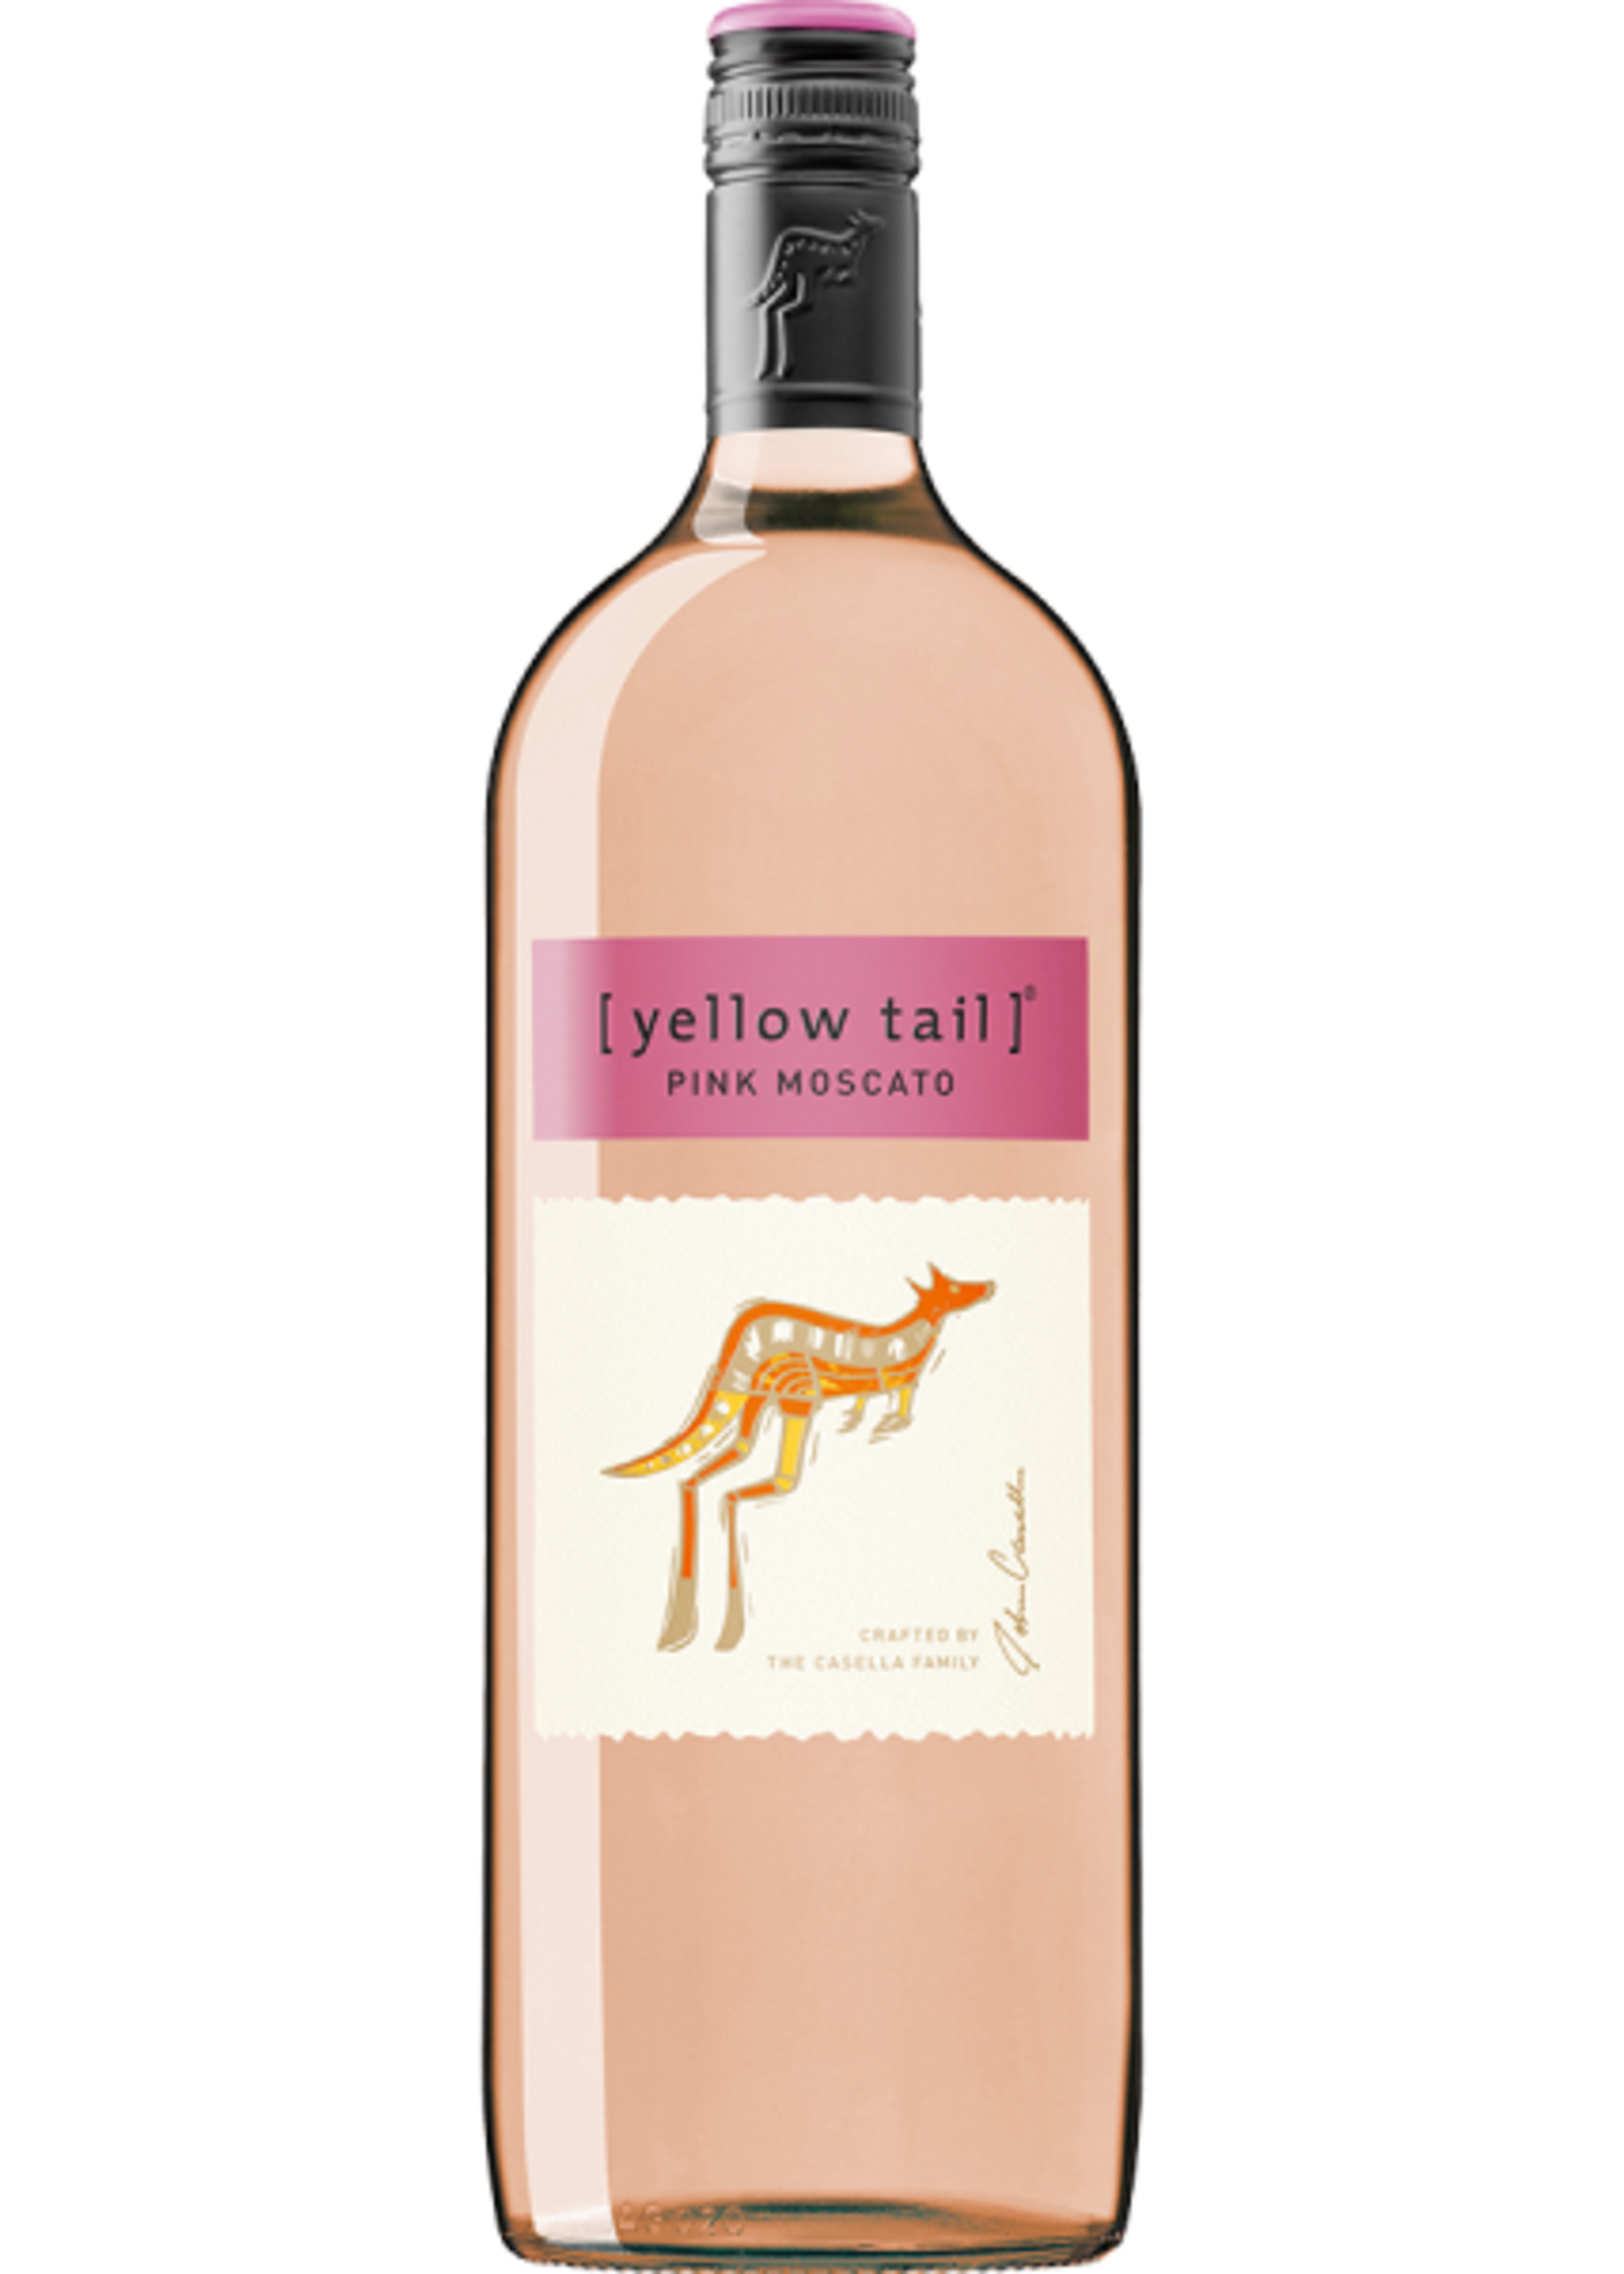 YELLOW TAIL YELLOW TAIL	PINK MOSCATO	1.5L